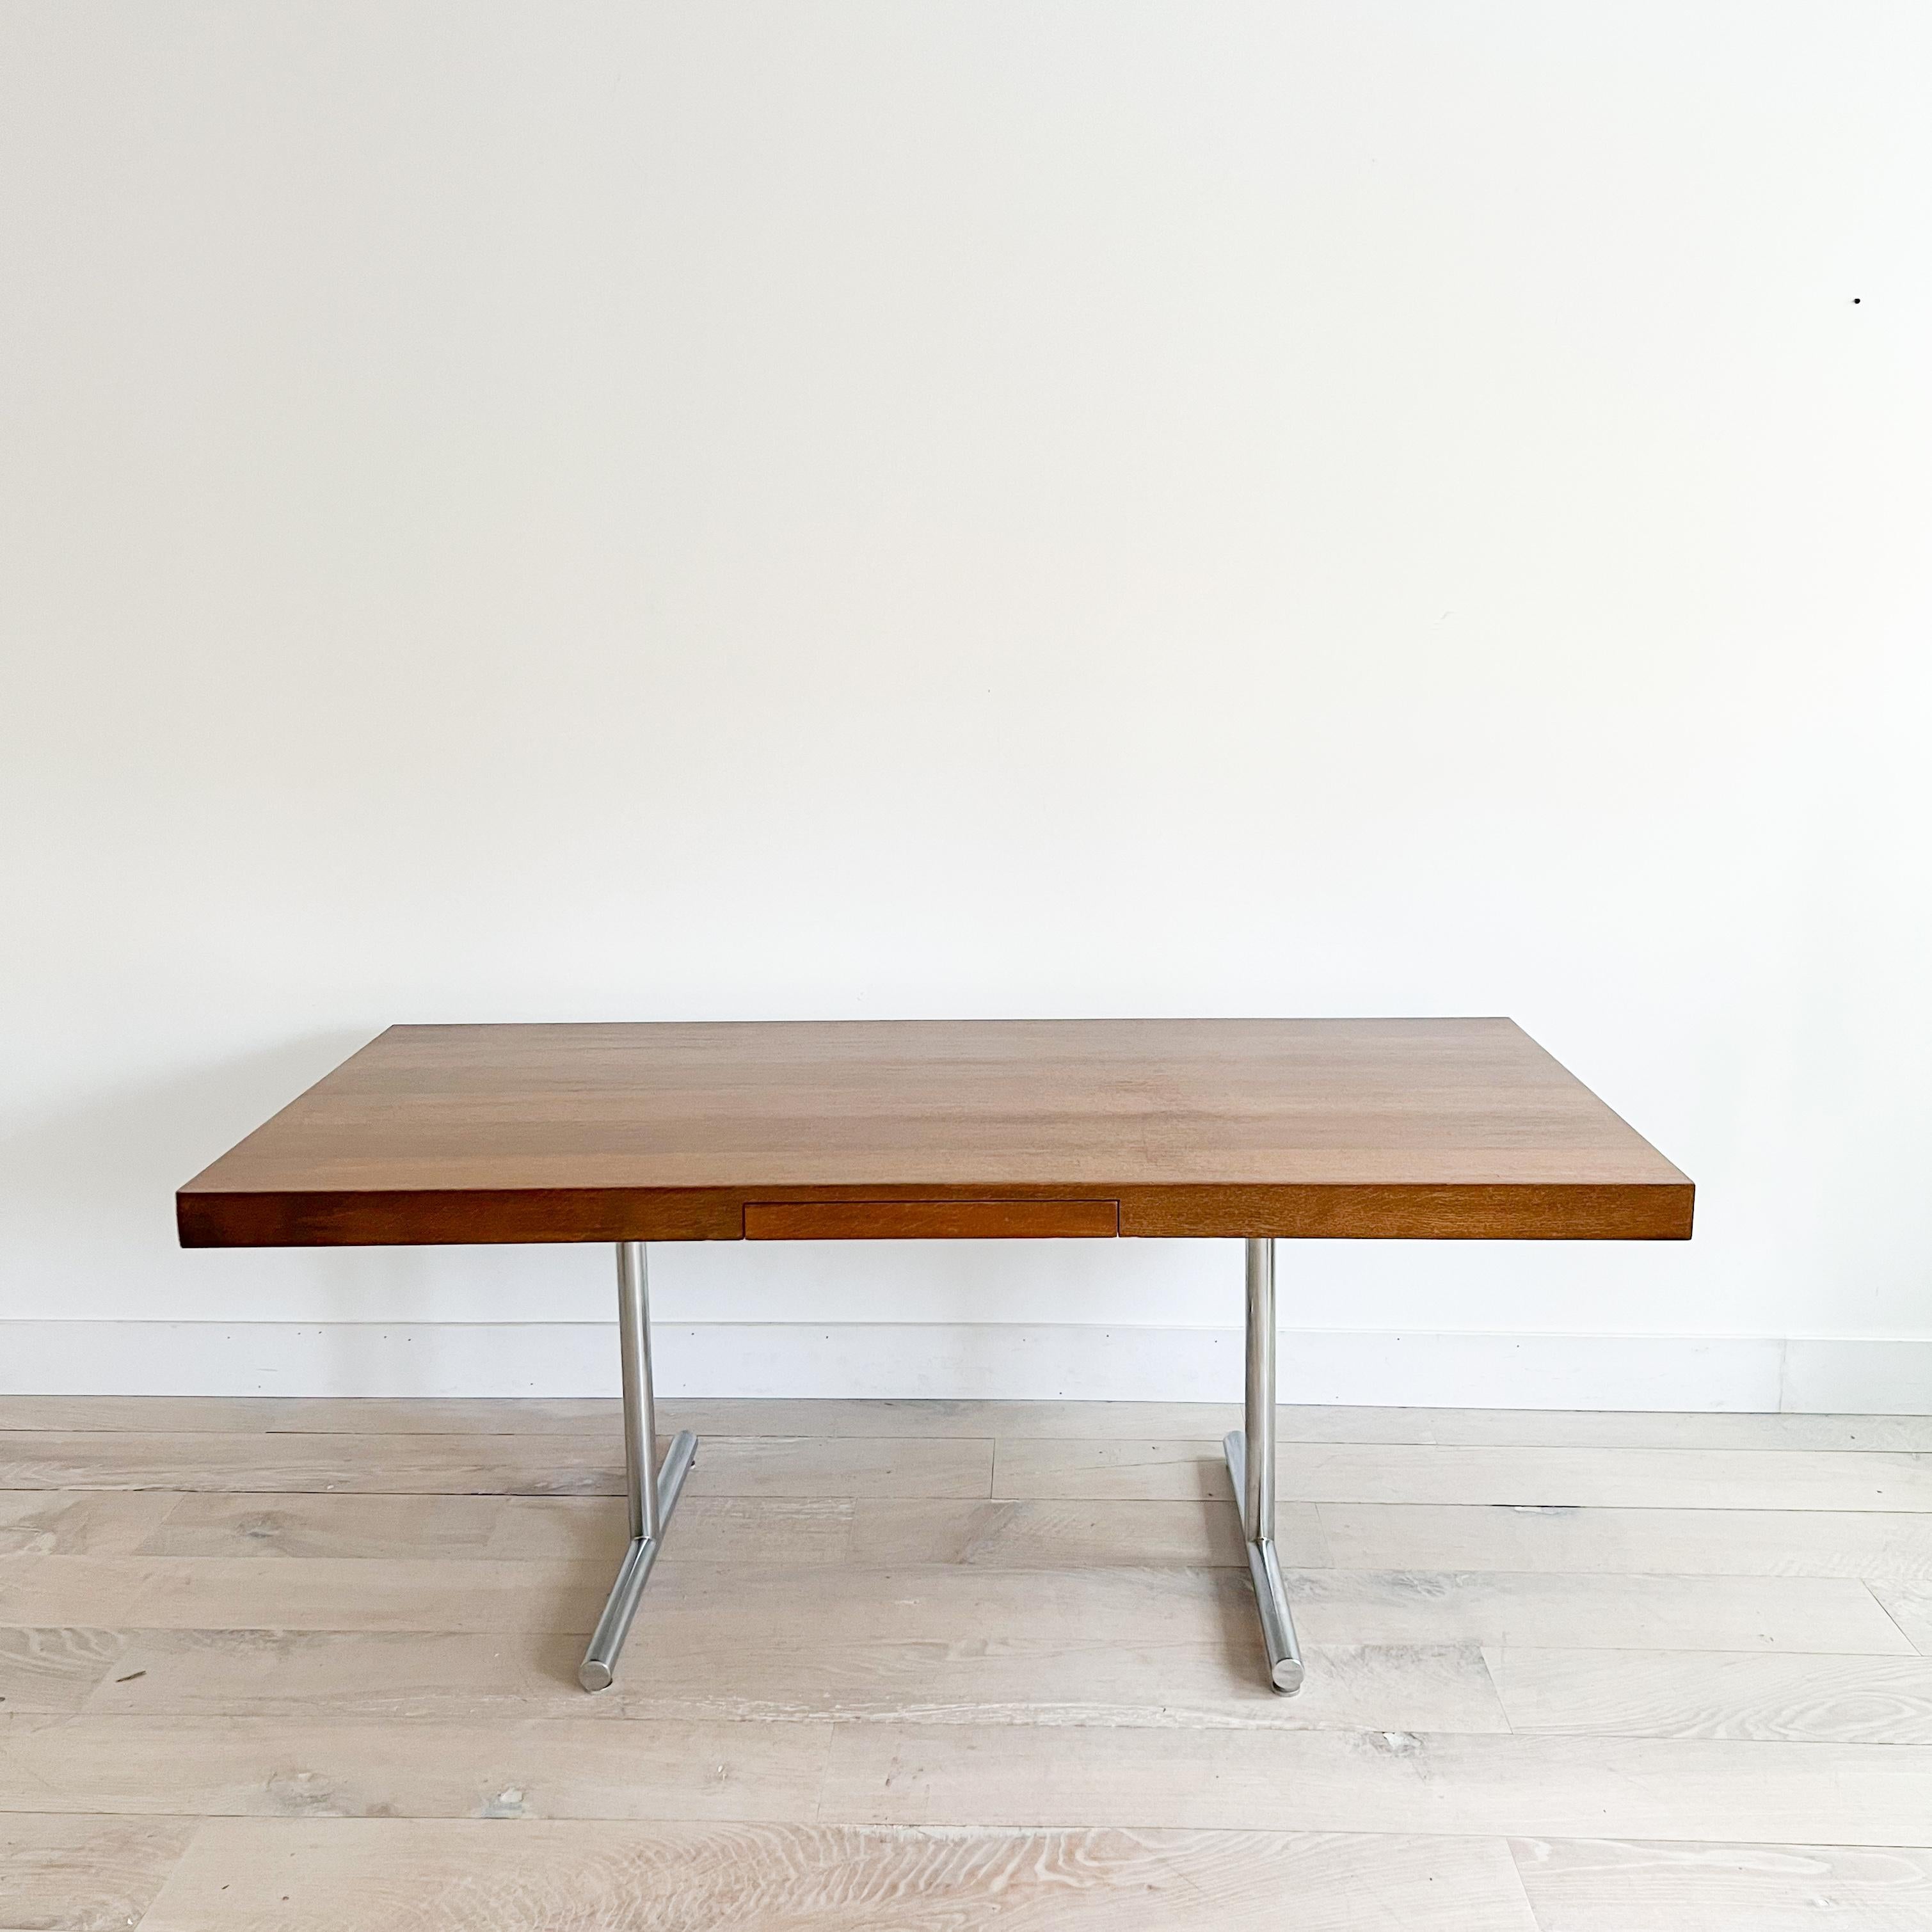 Stunning mid century modern quarter sawn oak desk with  chrome base by Hans Eichenberger for Stendig. Stamped “Stendig” underneath. The top has been sanded and restored. Hidden single drawer. Some light scuffing/scratching from age appropriate wear.